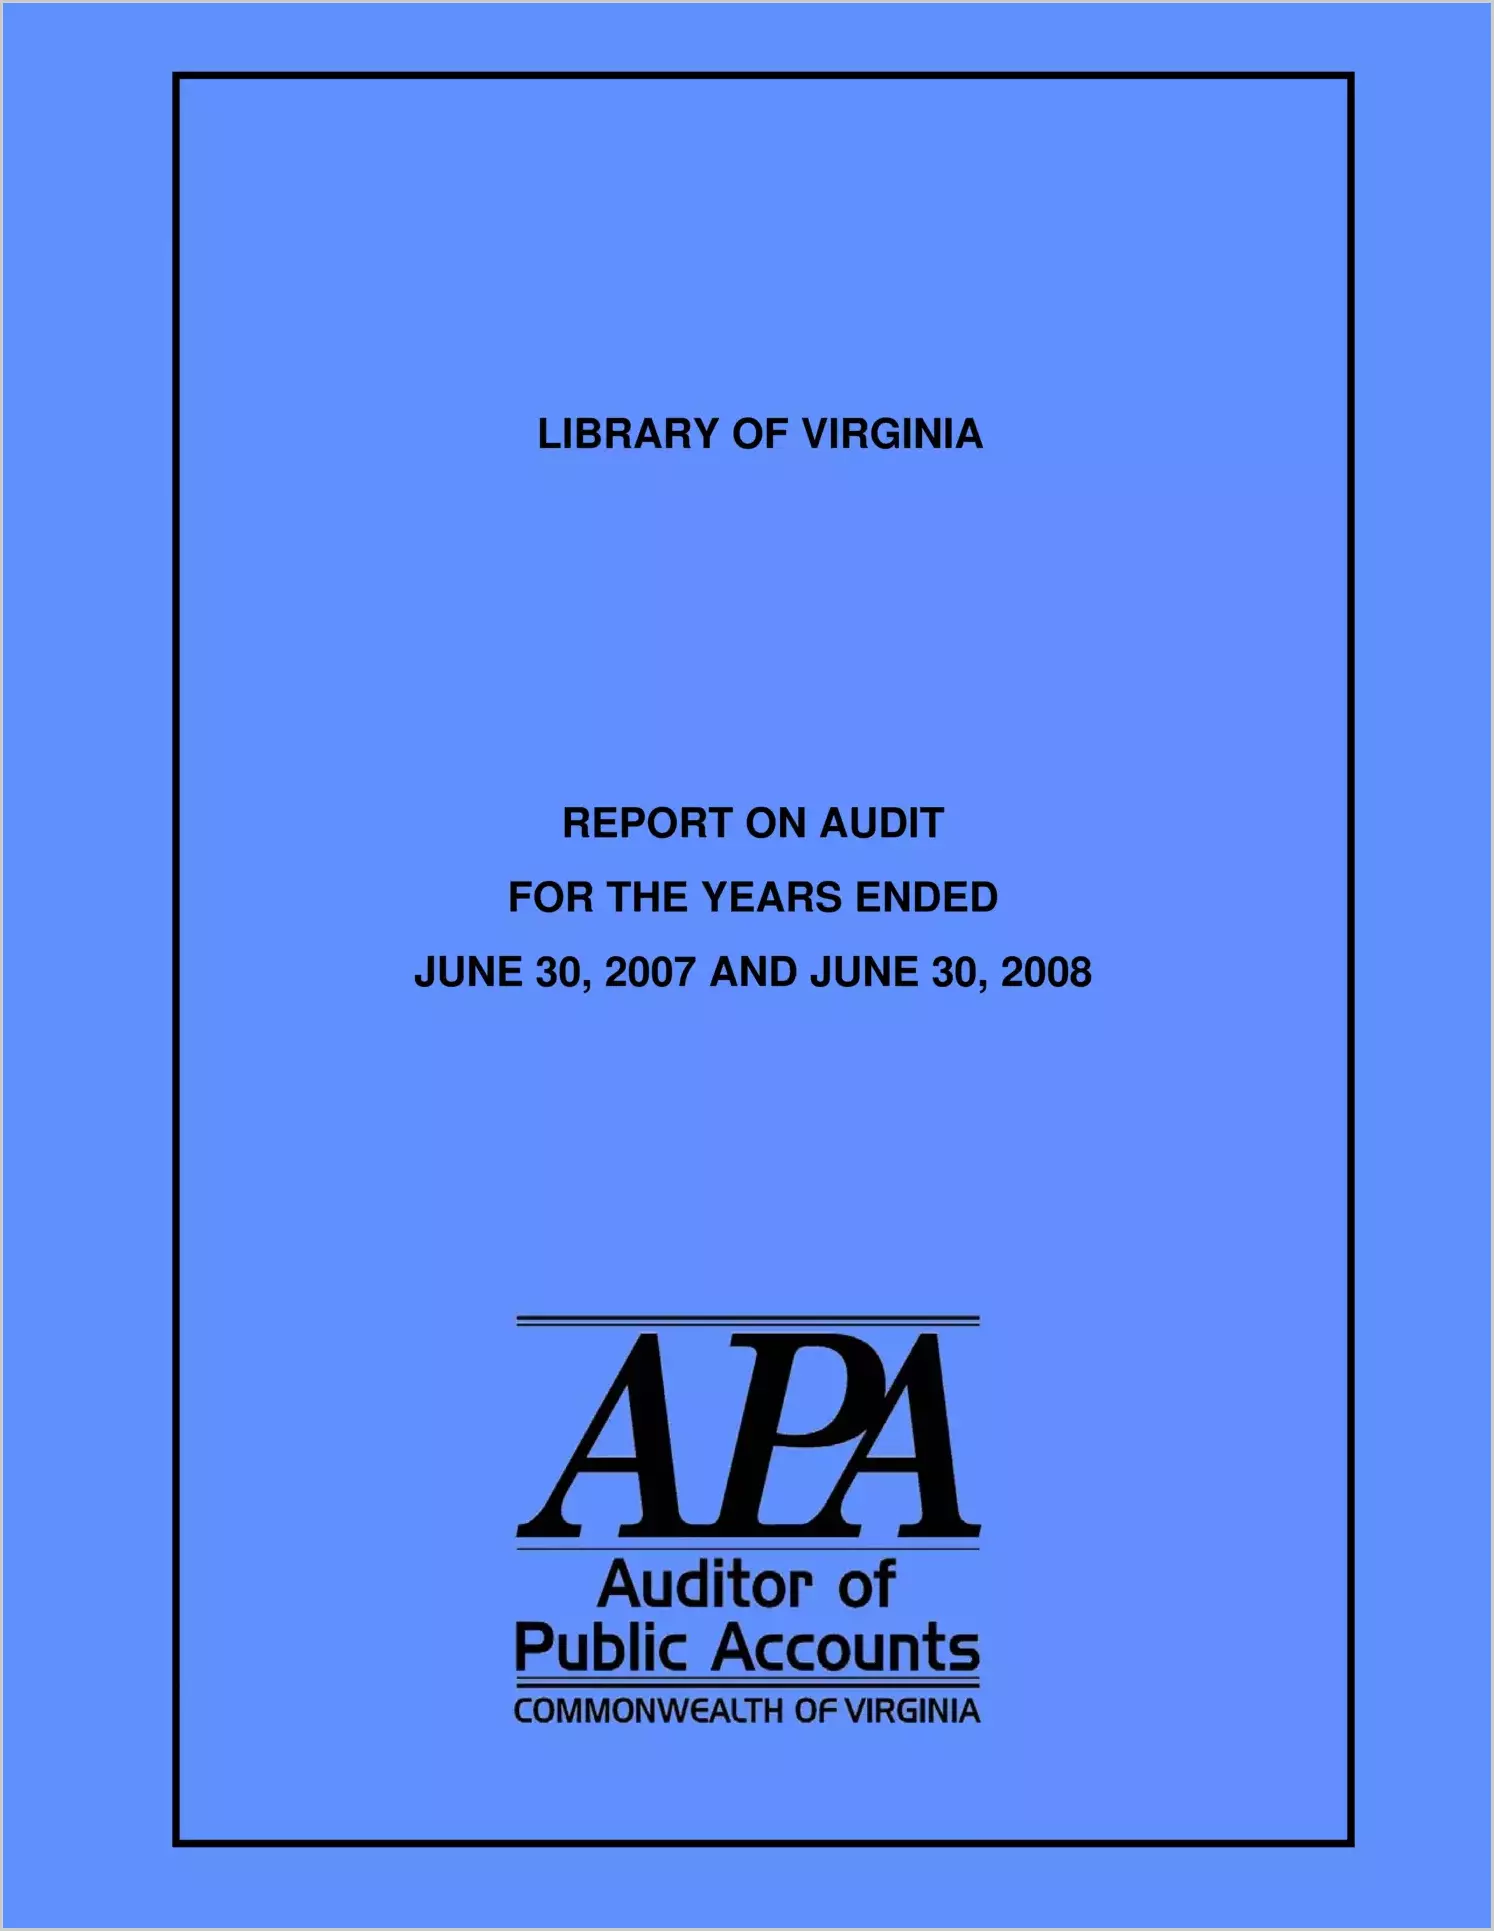 The Library of Virginia for the years ended June 30, 2007 and June 30, 2008